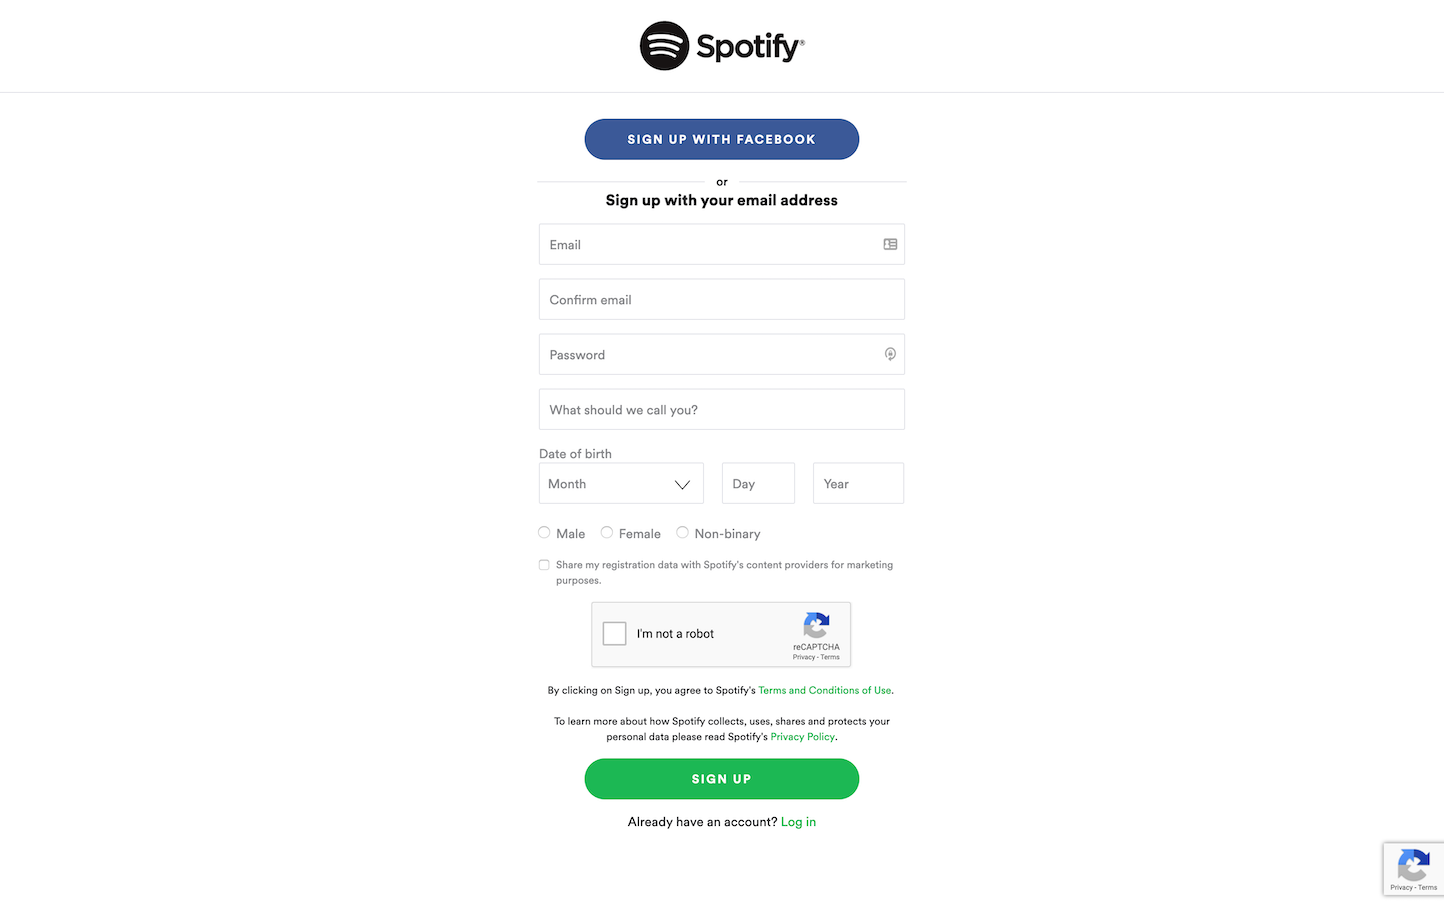 Screenshot of the Sign Up page from the Spotify website.